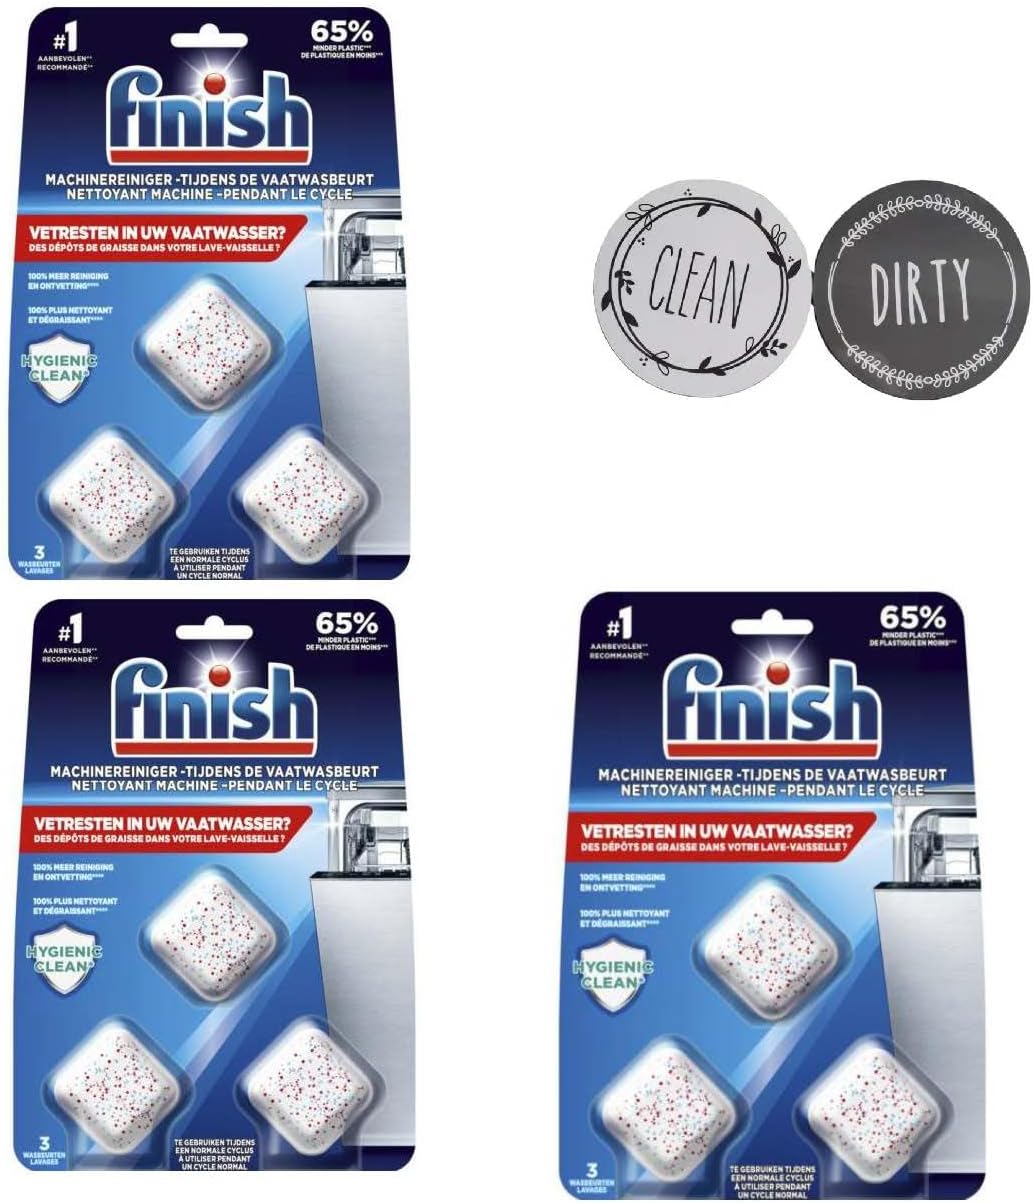 In-Wash Dishwasher Cleaner Tabs - 3 Count (Pack of 3) Dishwasher Care Tabs, Hygienically Cleans Hidden Grease + DISHWASHER MAGNET